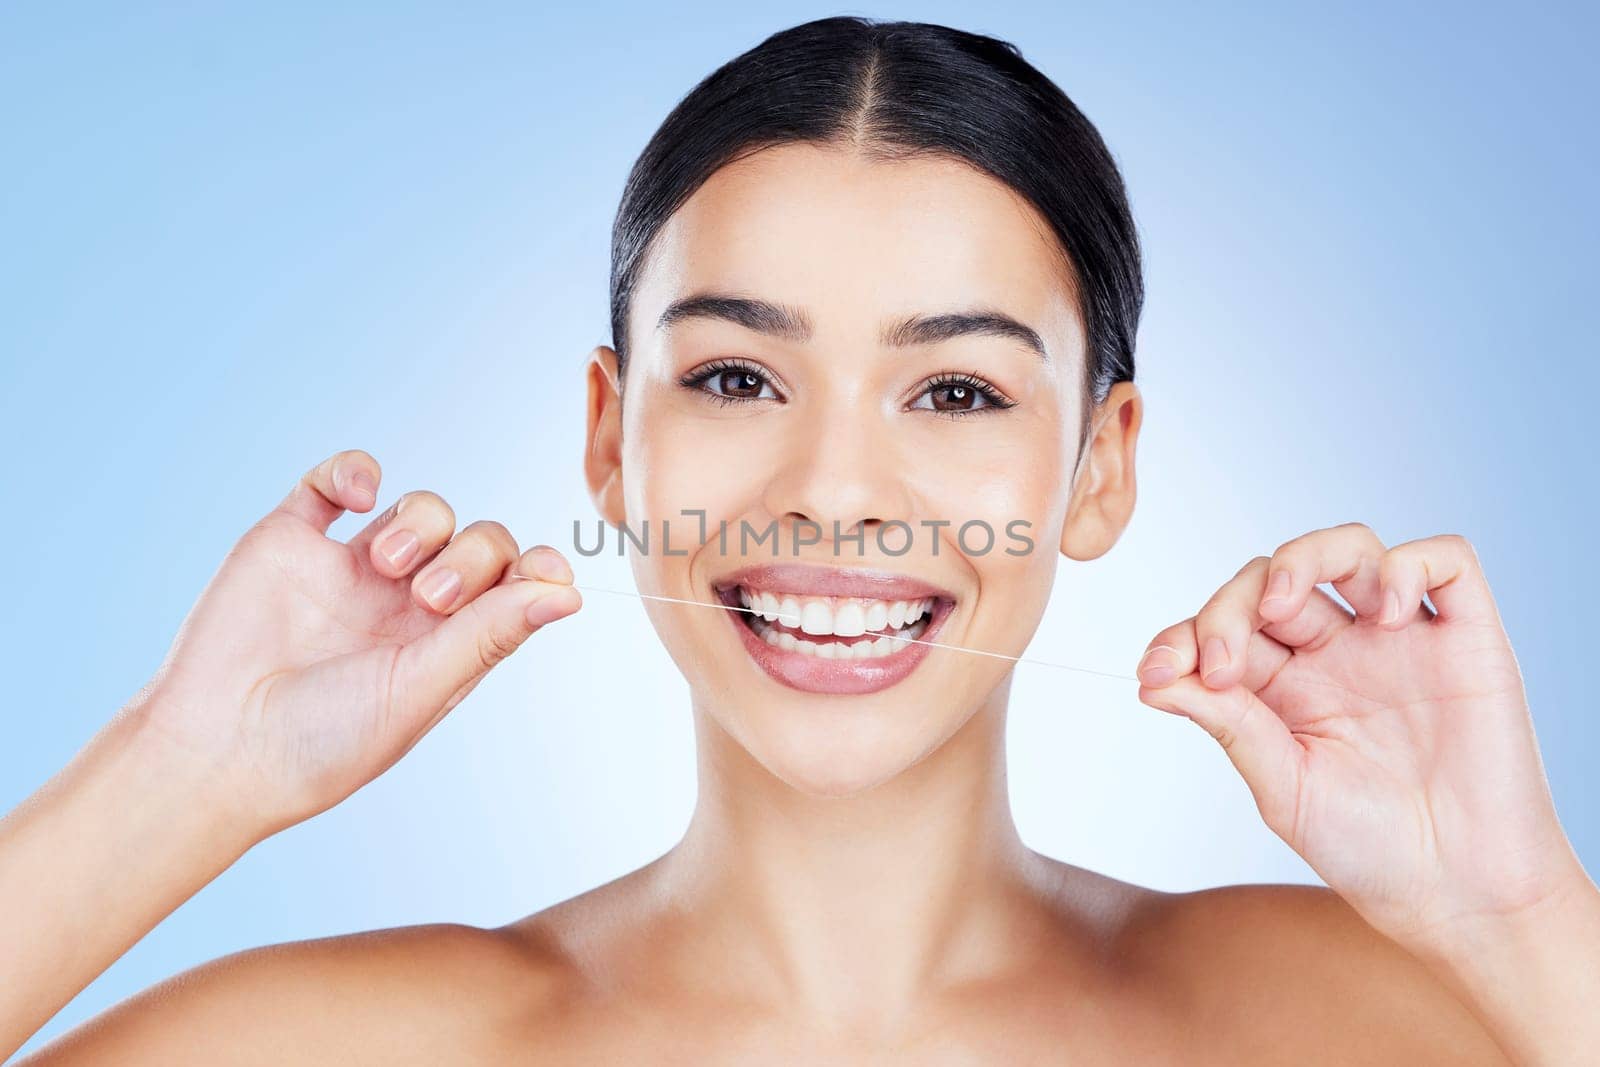 Face, flossing teeth and hygiene with woman, dental and beauty with grooming and mouth care on blue background. Hands, string and healthy gums with fresh breath, health and skin glow in portrait.